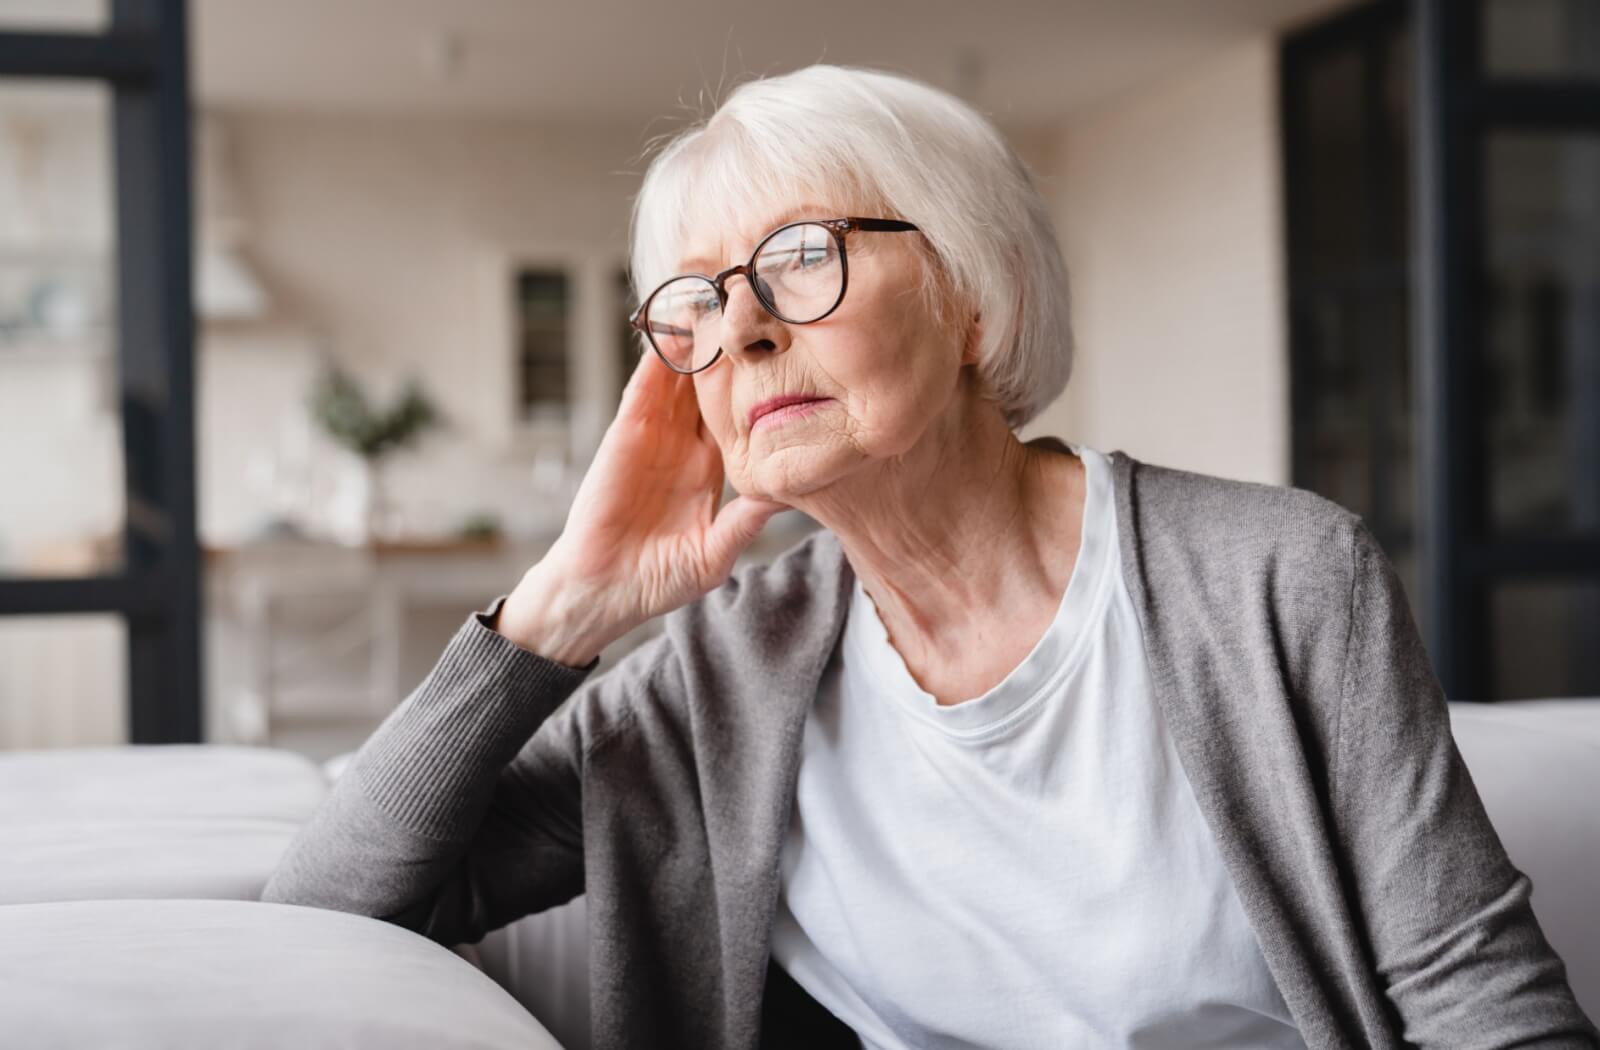 An older adult woman with glasses on sitting on a couch and looking out the window with a serious expression